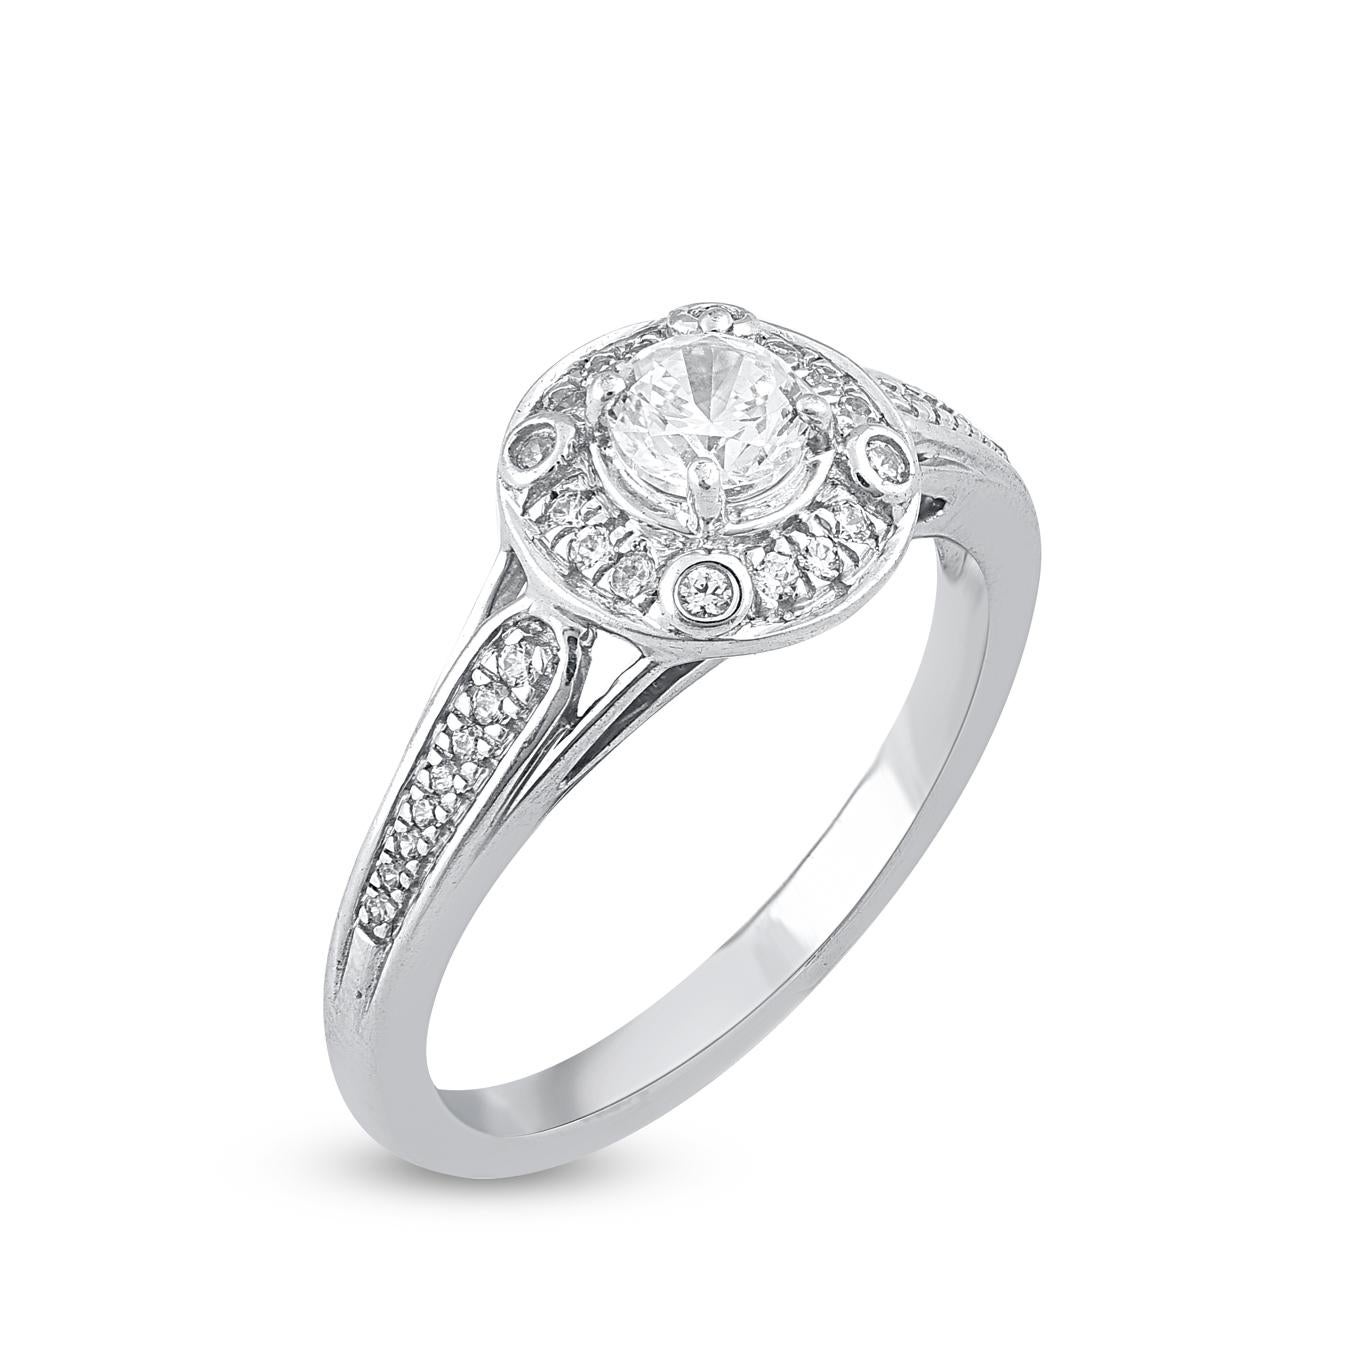 Classic and Contemporary, this diamond ring will enhance her jewelry collection. Embellished with 0.33 ct of center stone and 0.17 ct of diamond frame and on shoulders embellished beautifully in prong, pave and bezel setting. Hand crafted